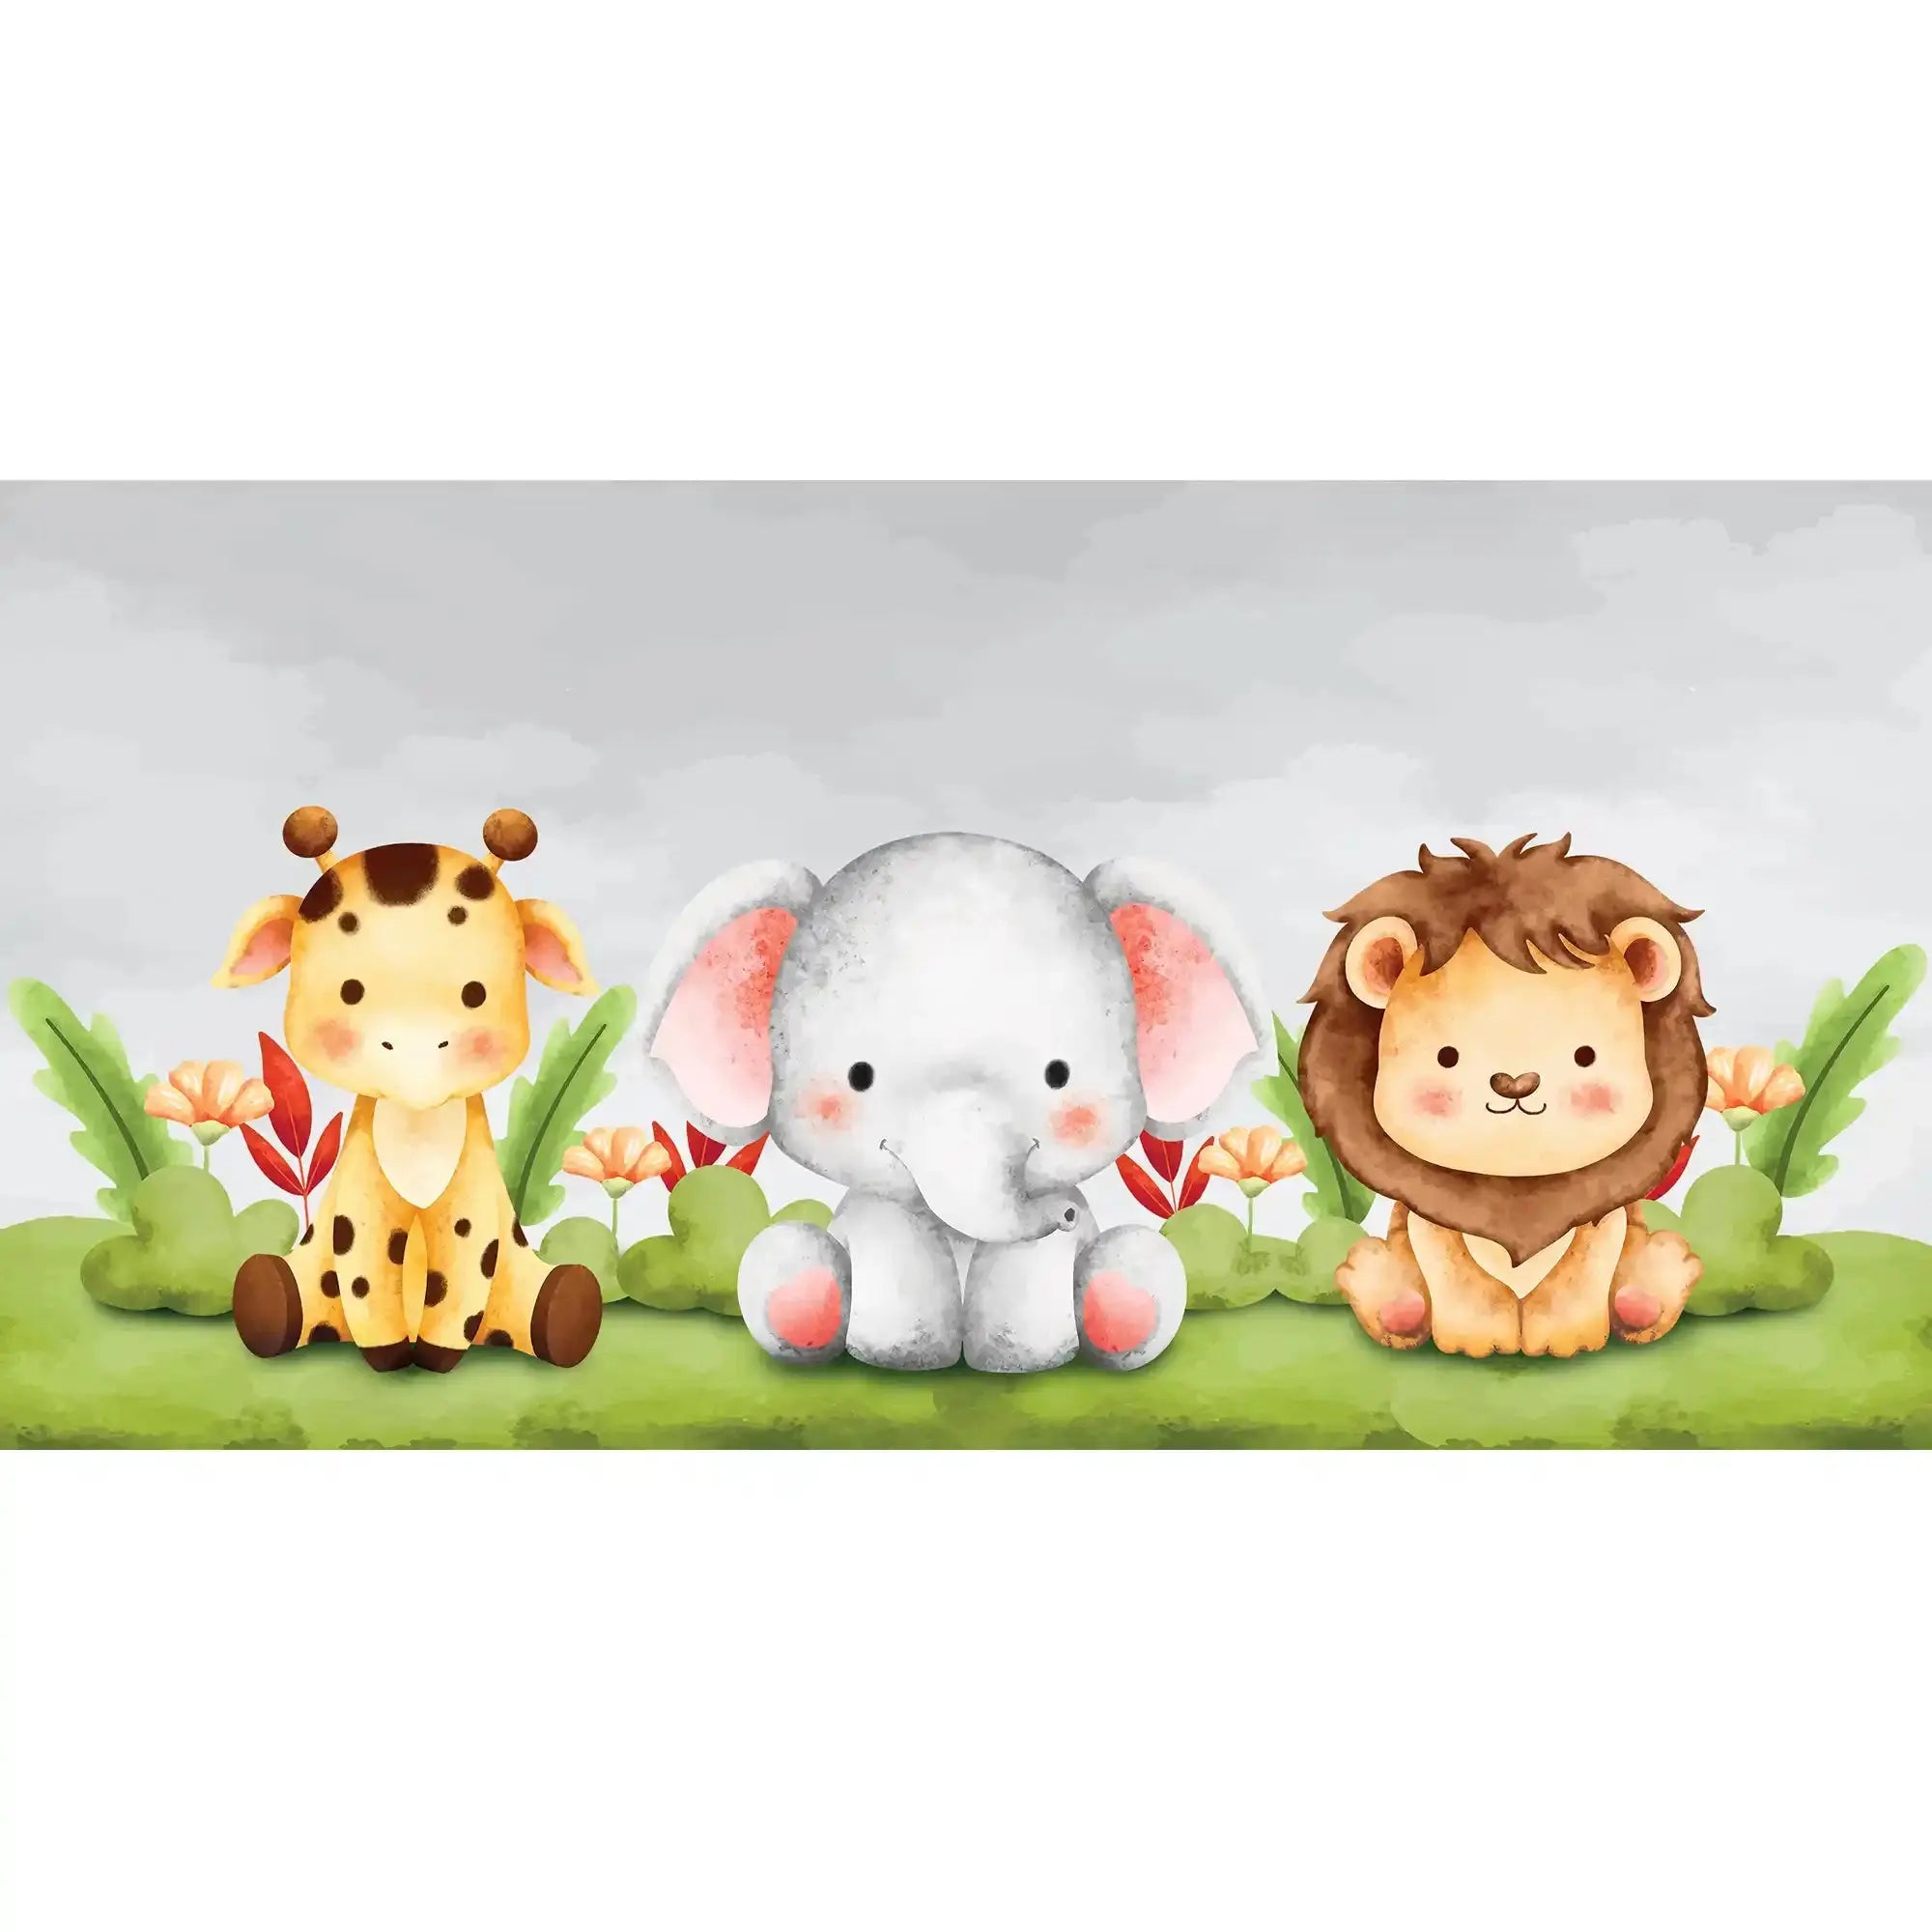 6007 / Playroom Decor with Pastel Animal Wall Mural - Easy Peel and Stick, Temporary Wallpaper - Artevella